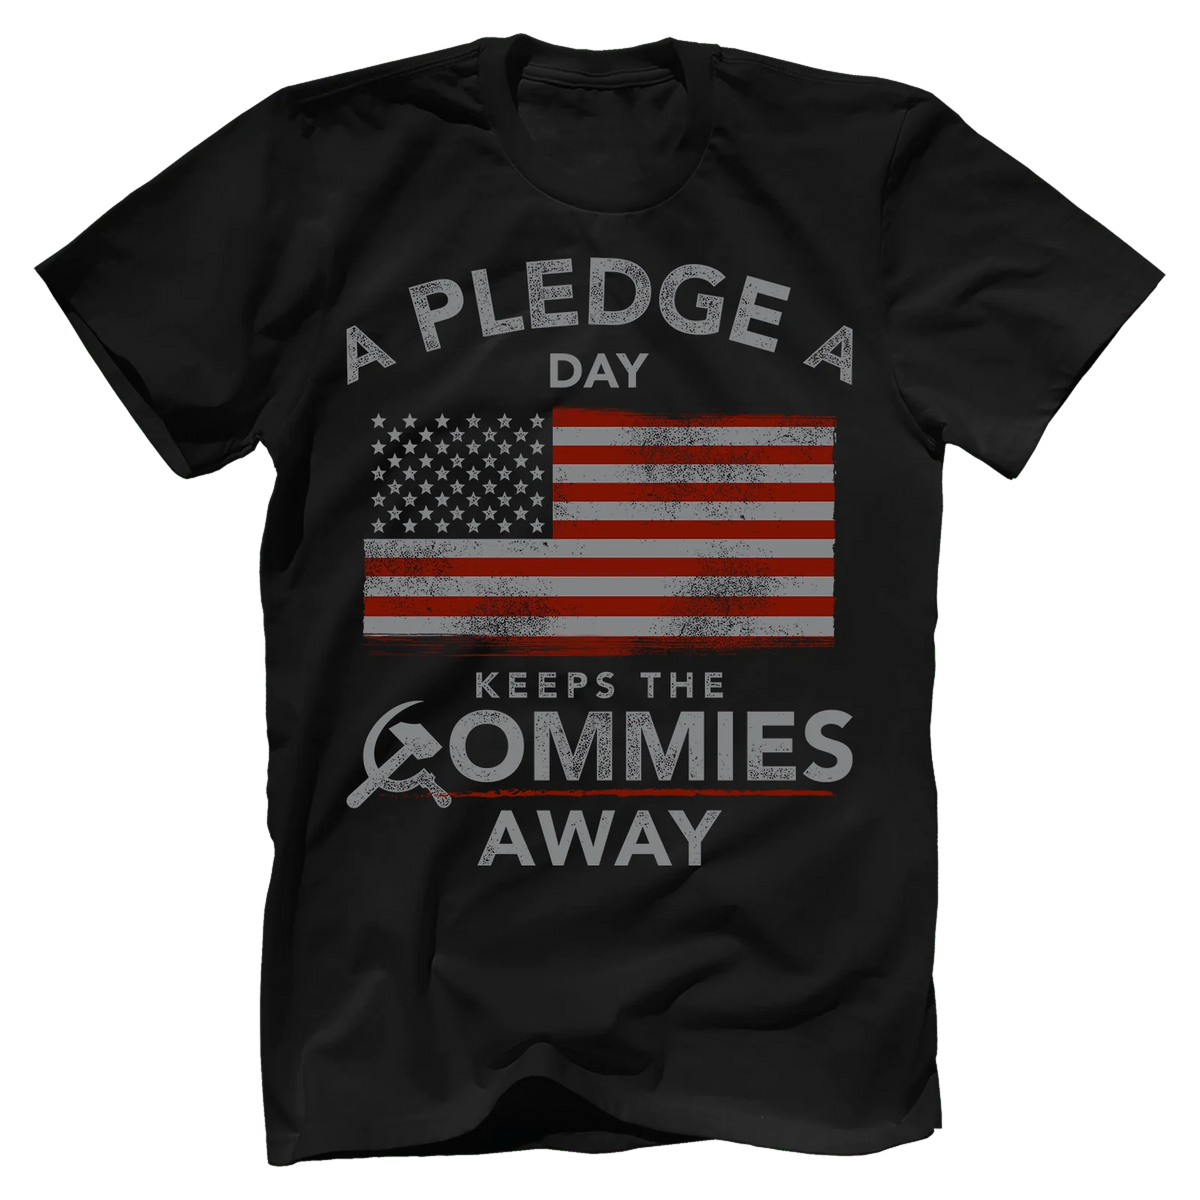 A Pledge a Day Keeps the Commies Away